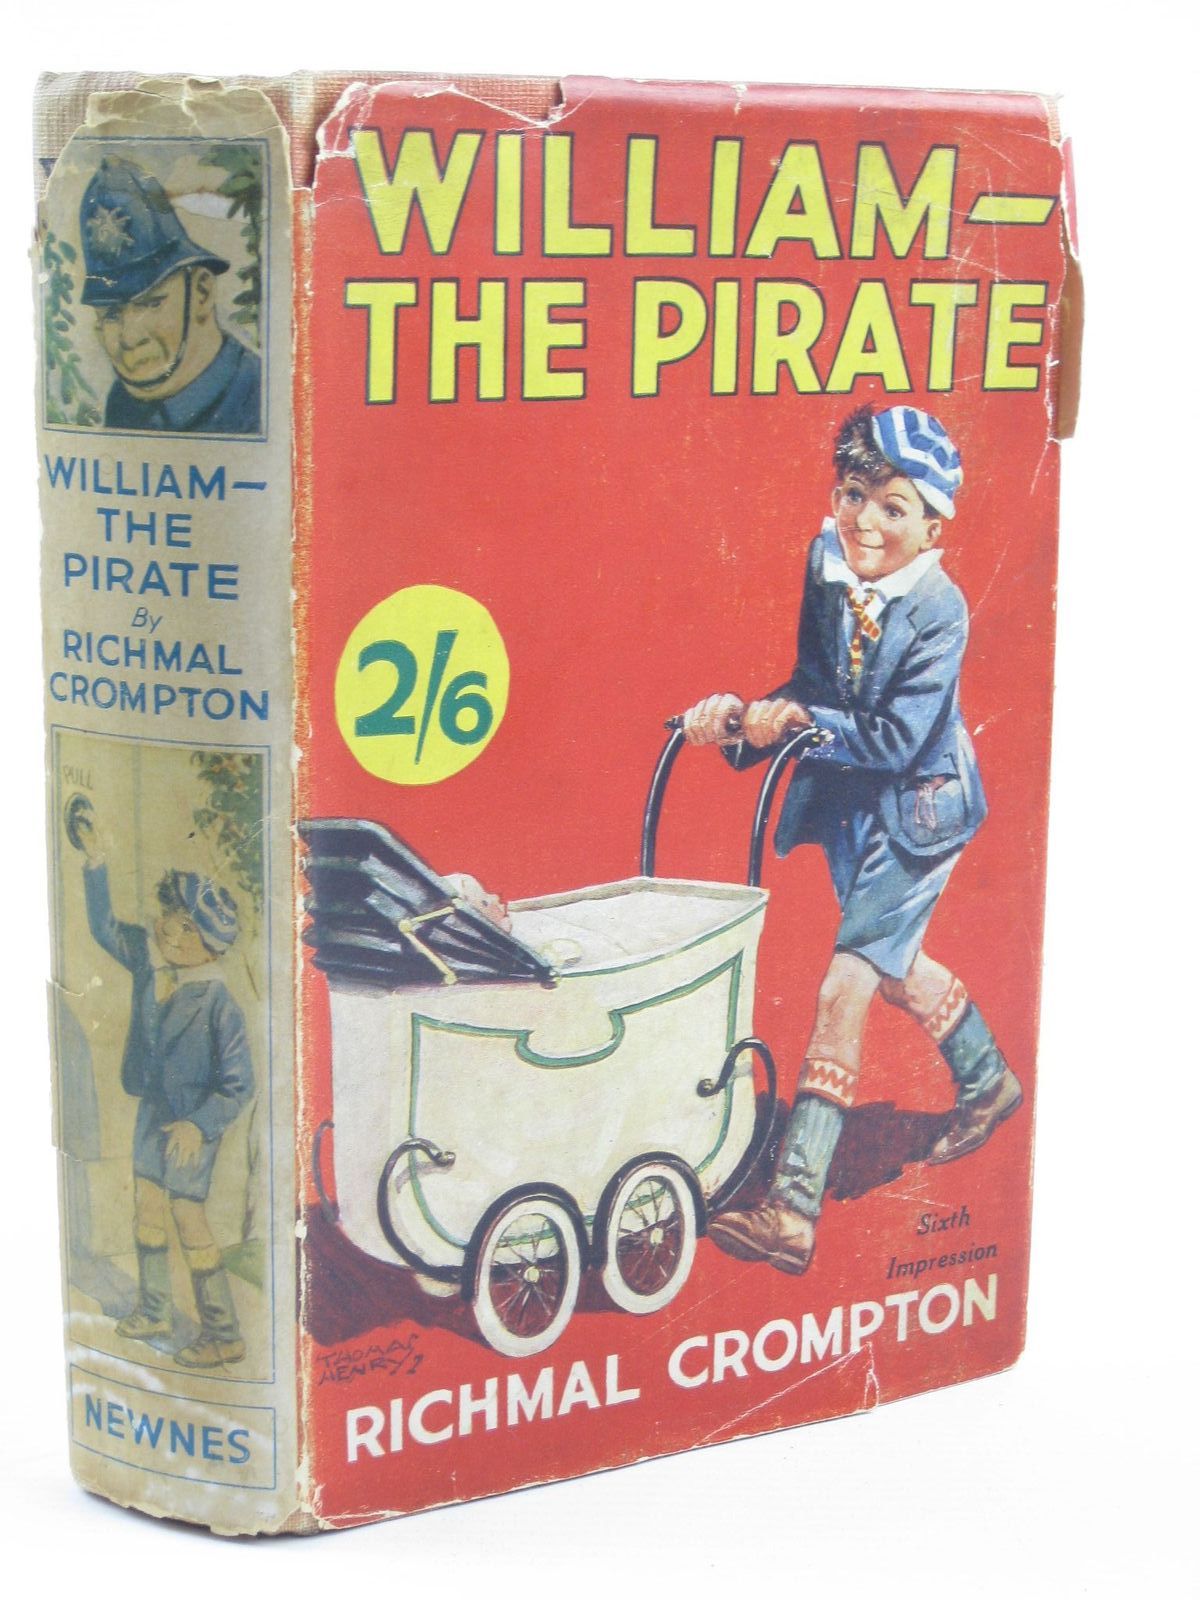 Cover of WILLIAM-THE PIRATE by Richmal Crompton